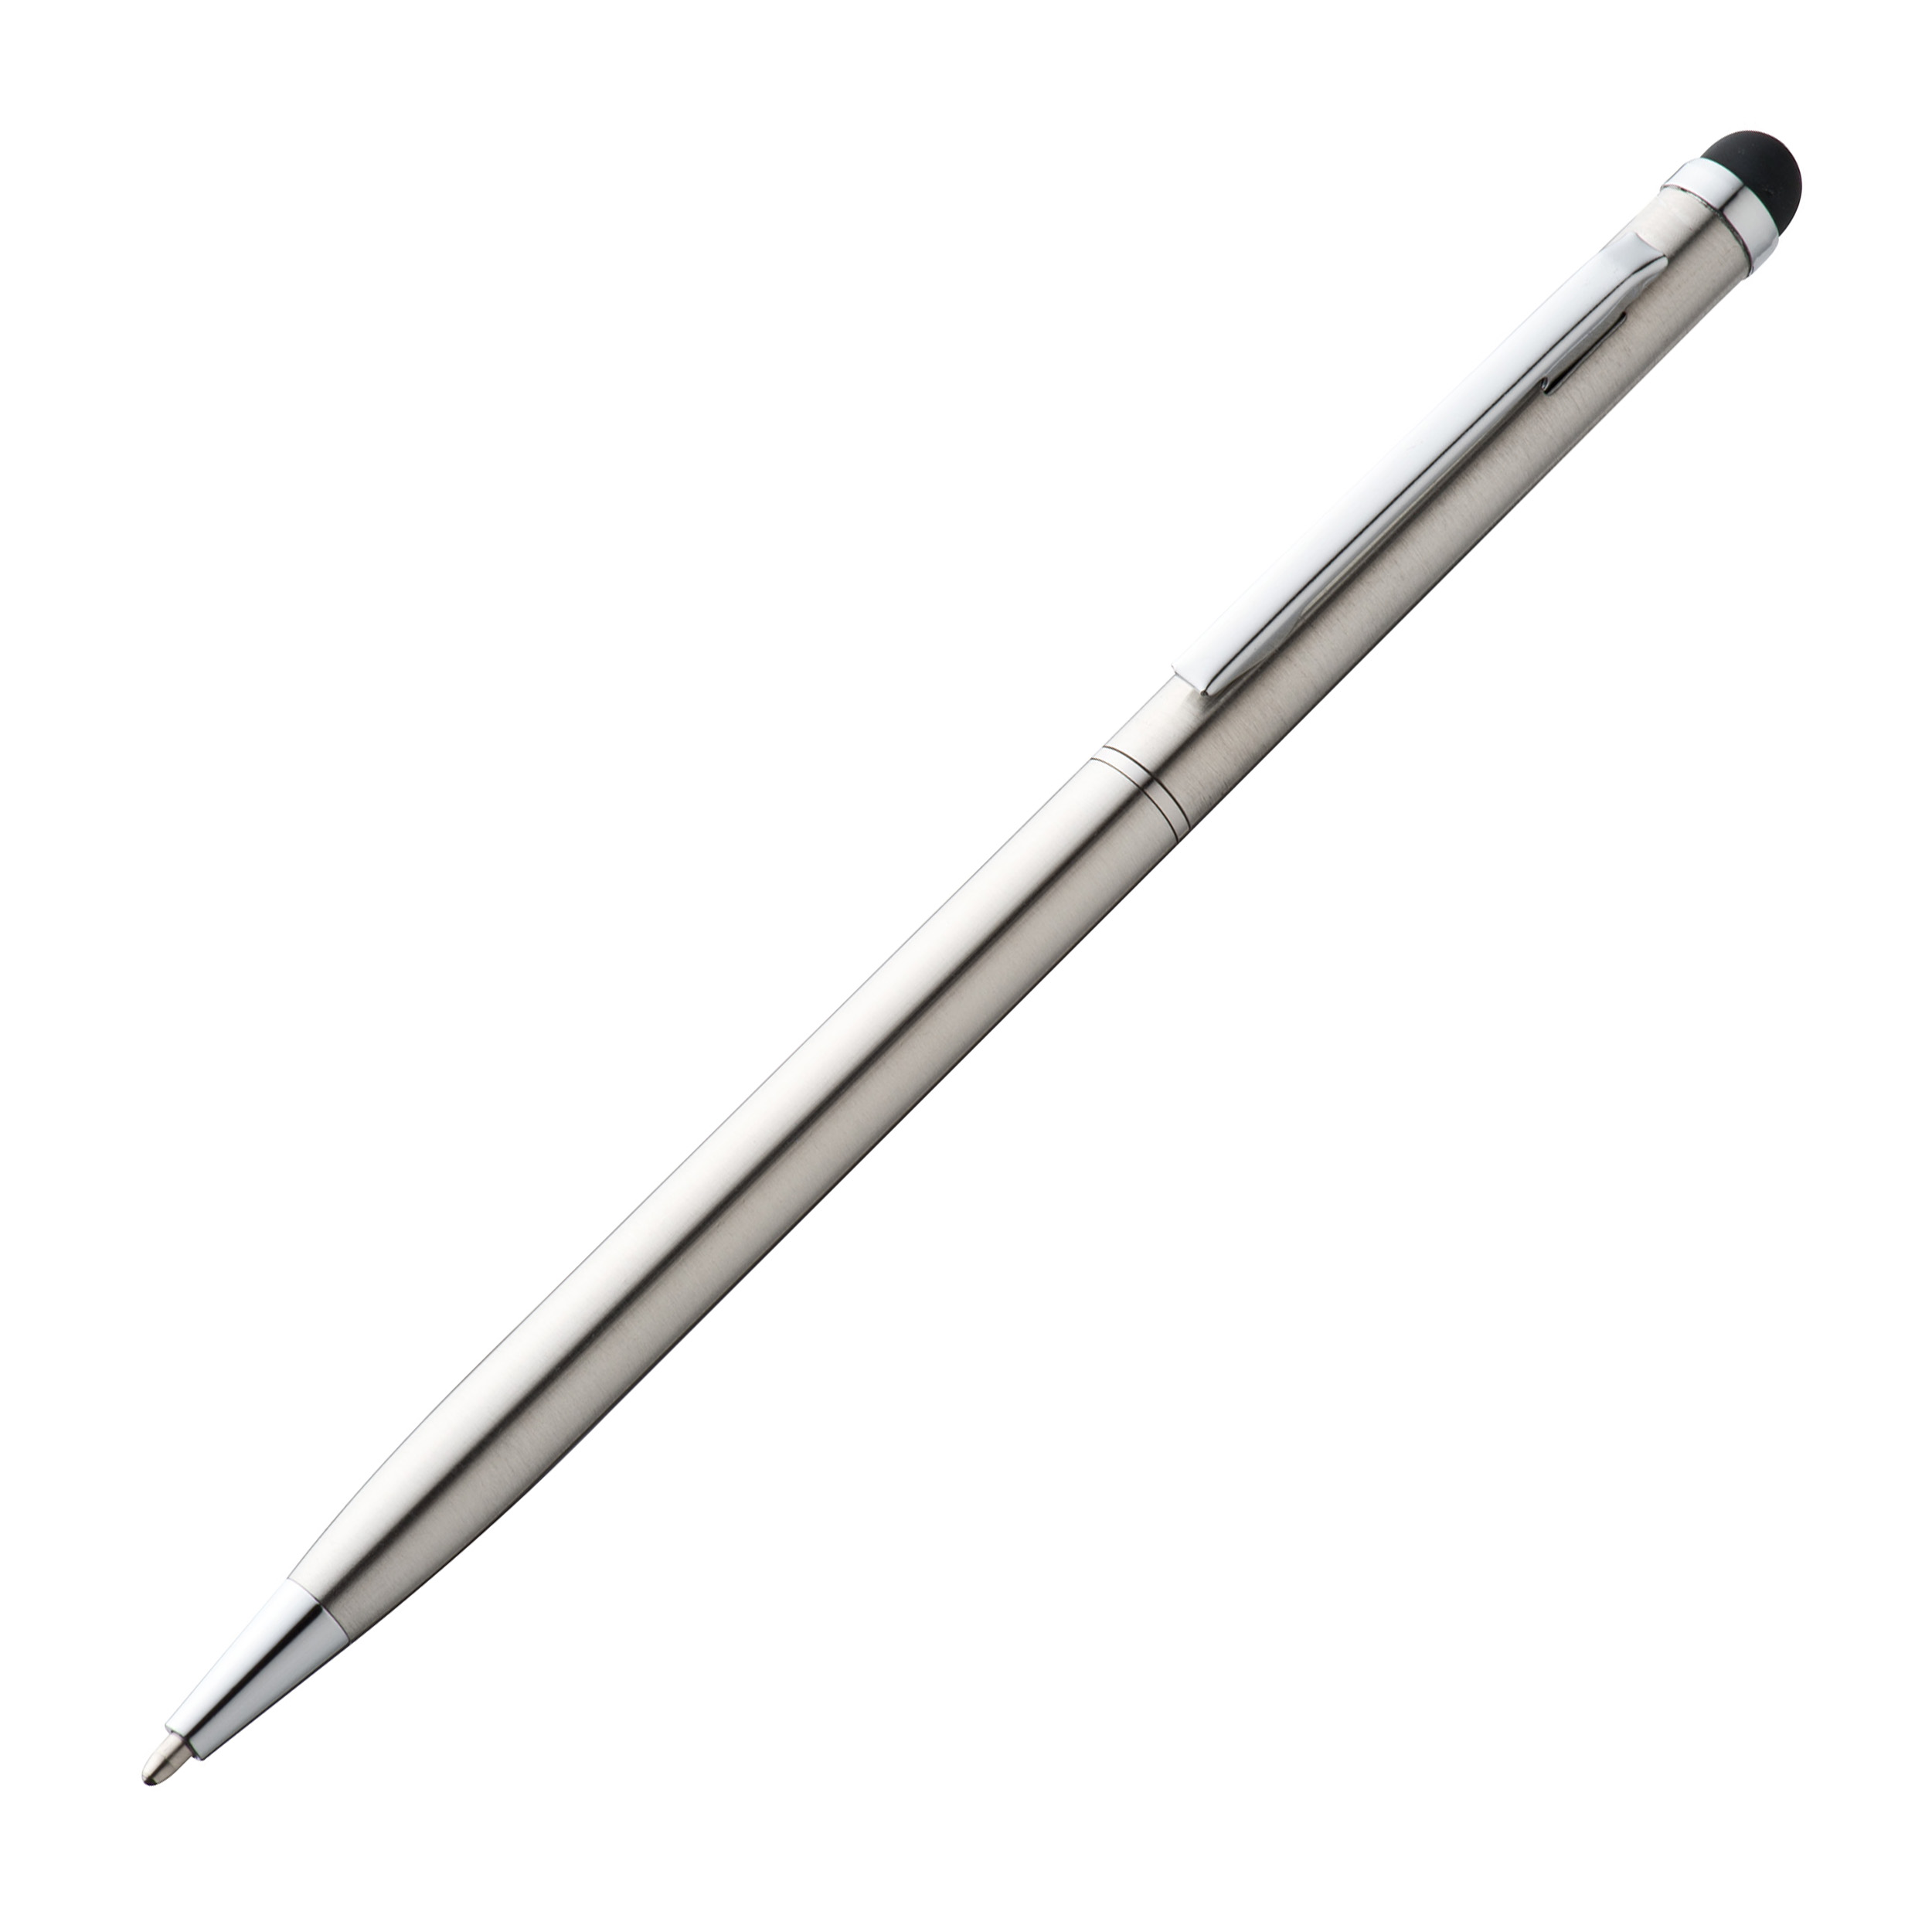 Stainless Steel Stylus - Montcuq - Kingston upon Thames